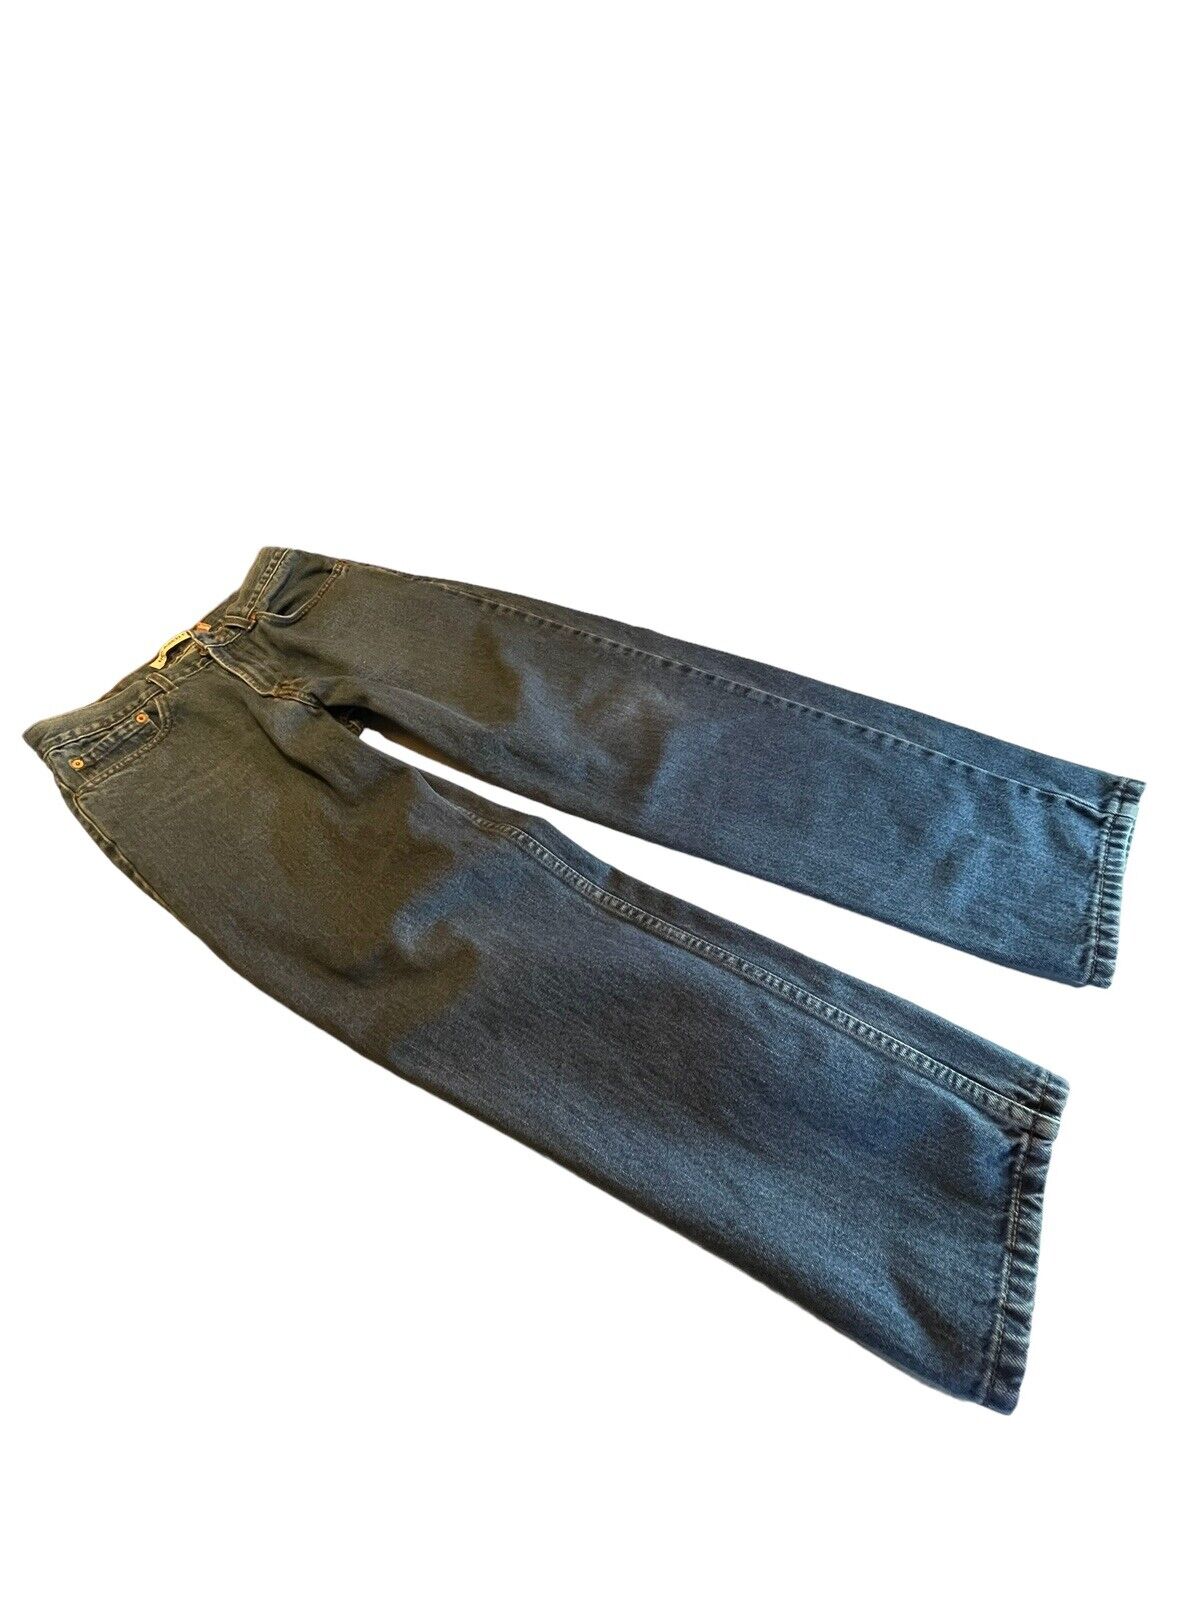 levis 550 relaxed fit 31x30 - image 1